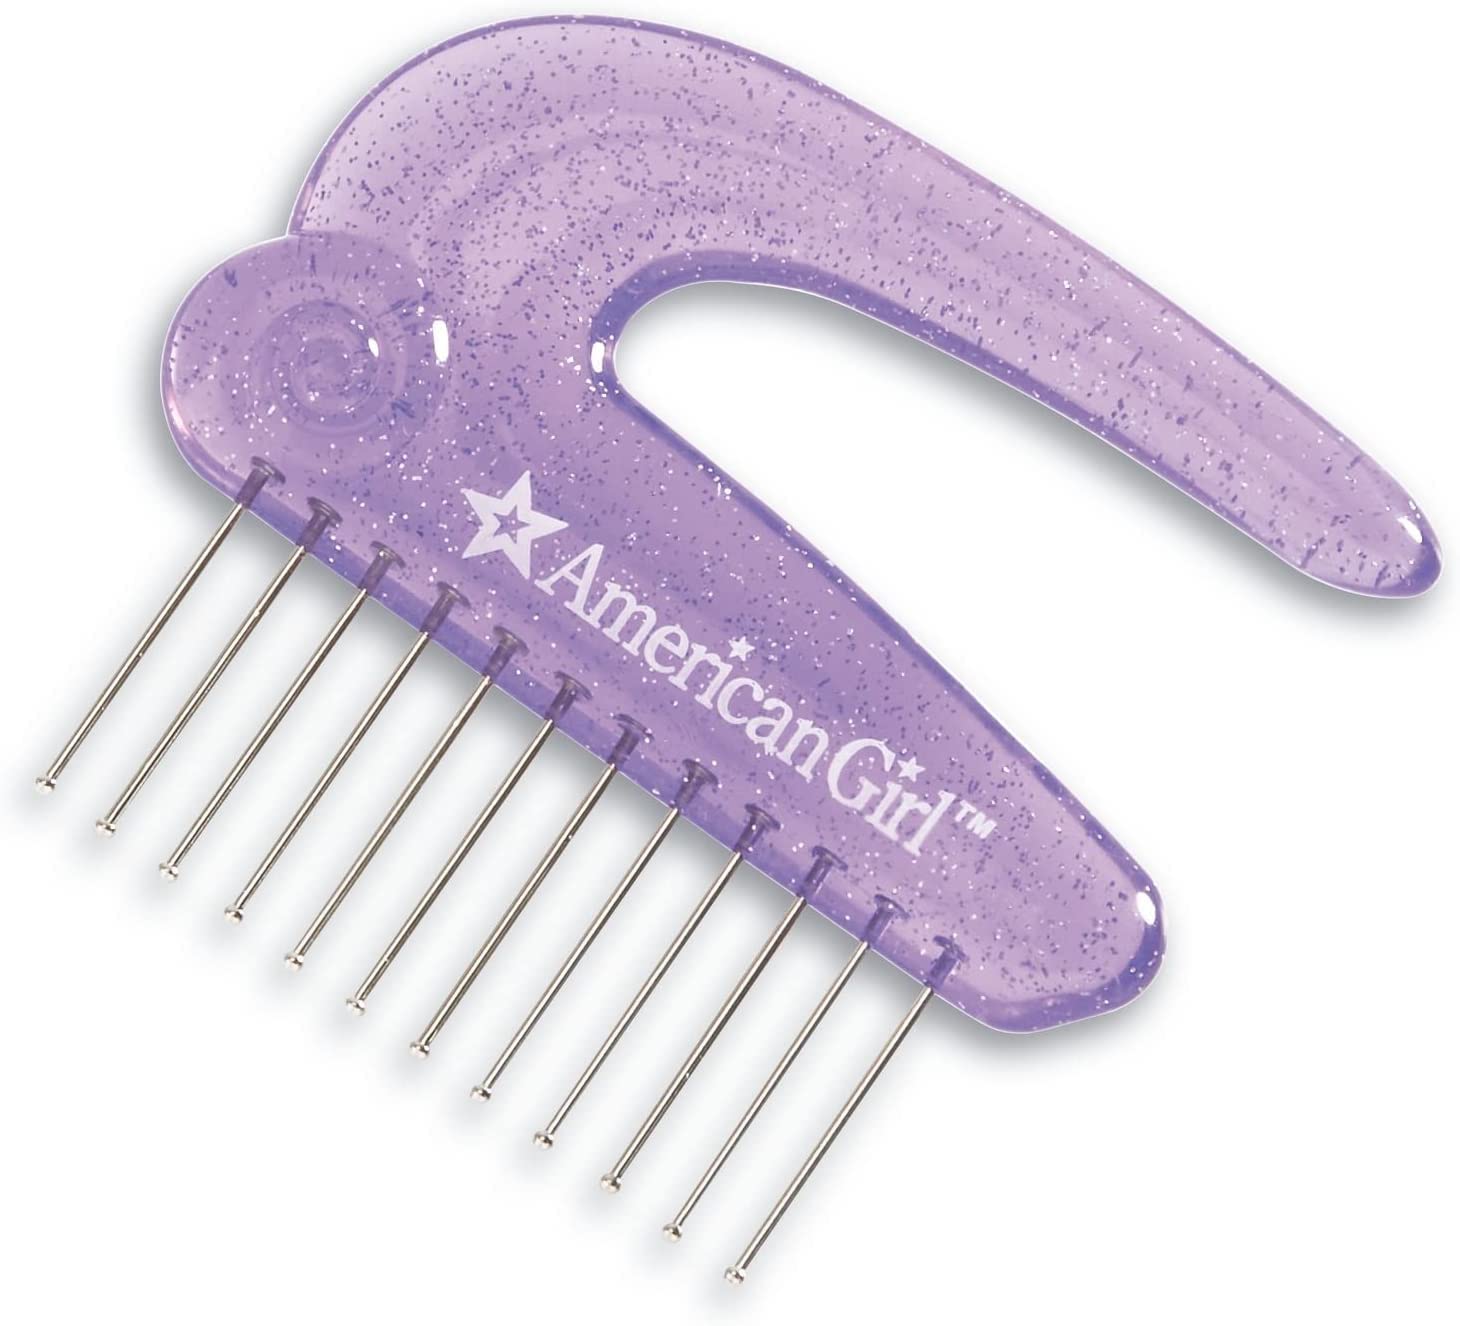 American Girl Sparkly Hair Pick for Styling 18-inch Doll Hair